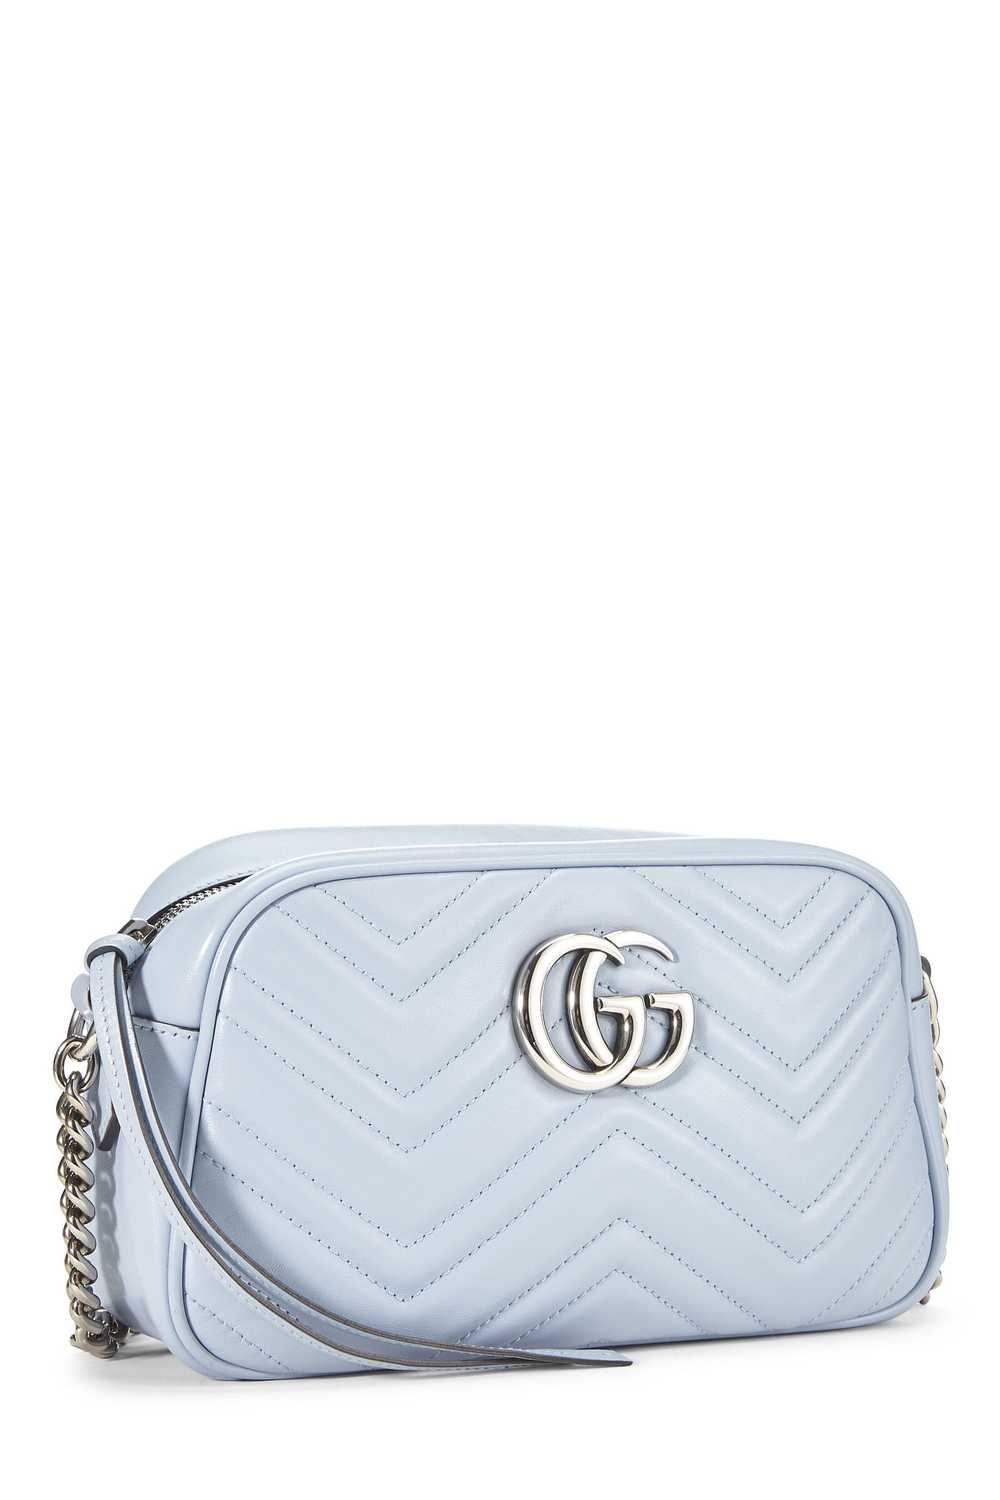 Blue Leather GG Marmont Crossbody Small - image 2